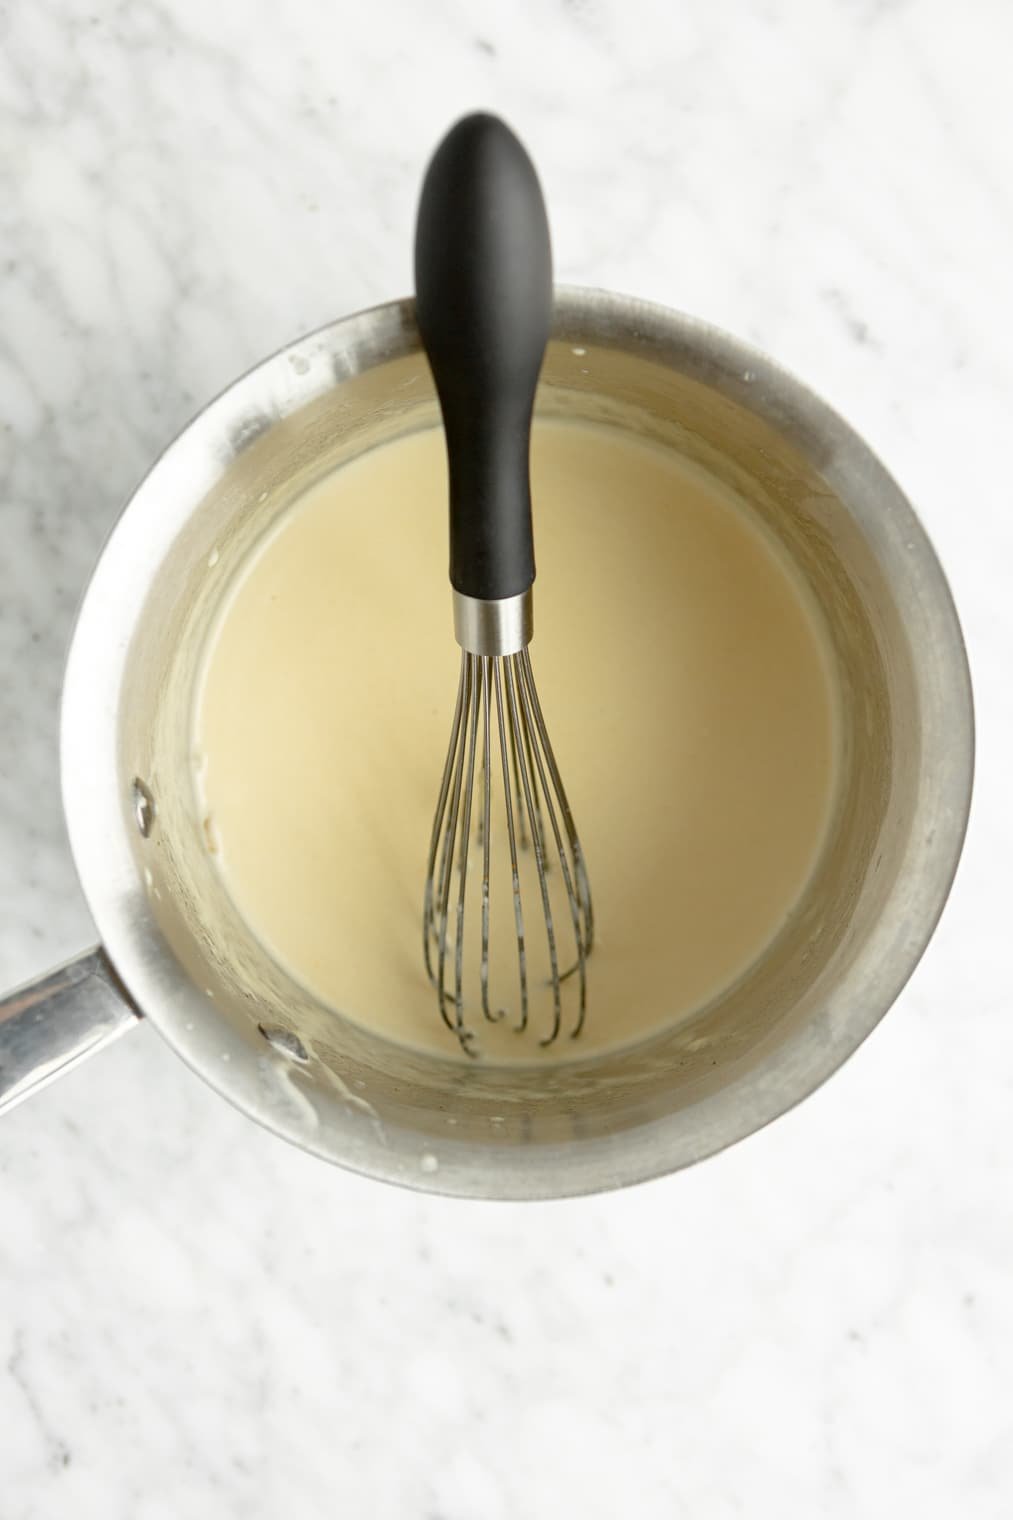 A creamy alfredo sauce in a stainless steel saucepan.